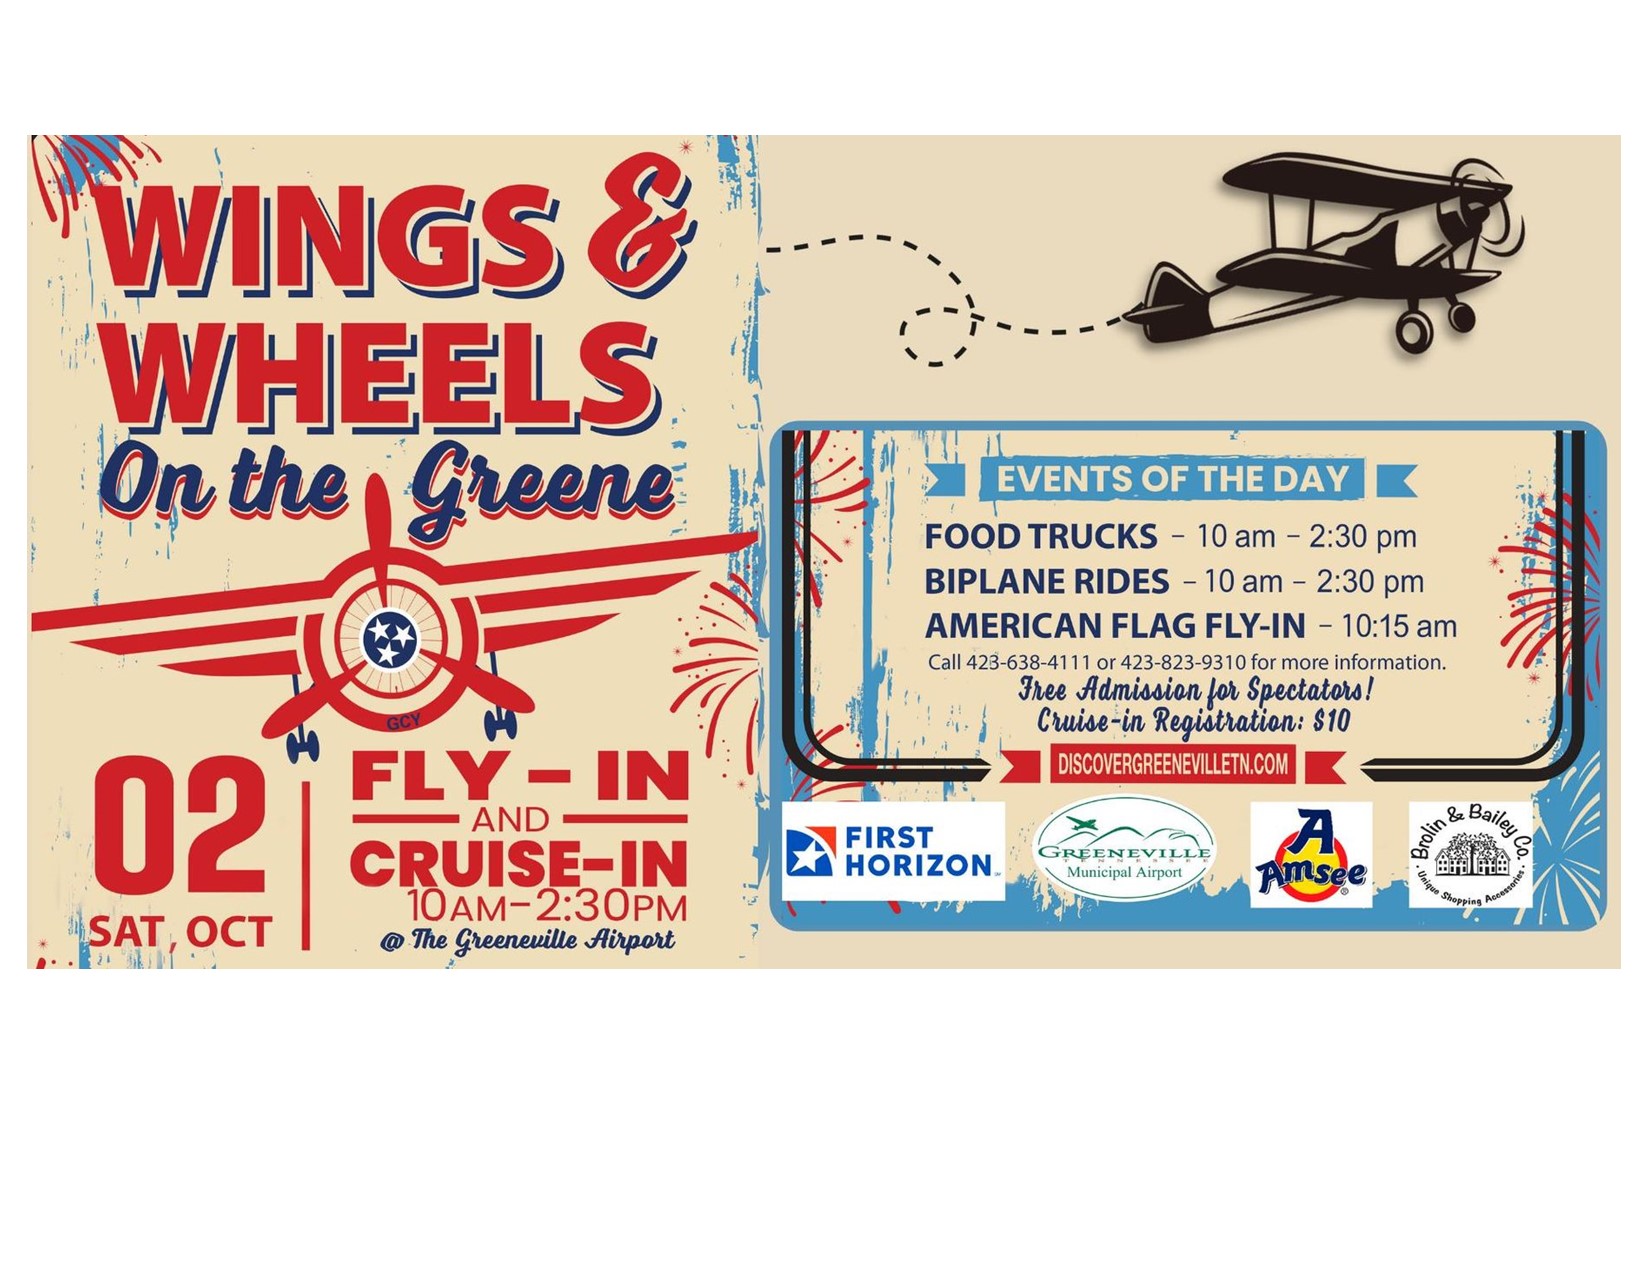 Wings & Wheels on the Greene Tennessee Aviation Association